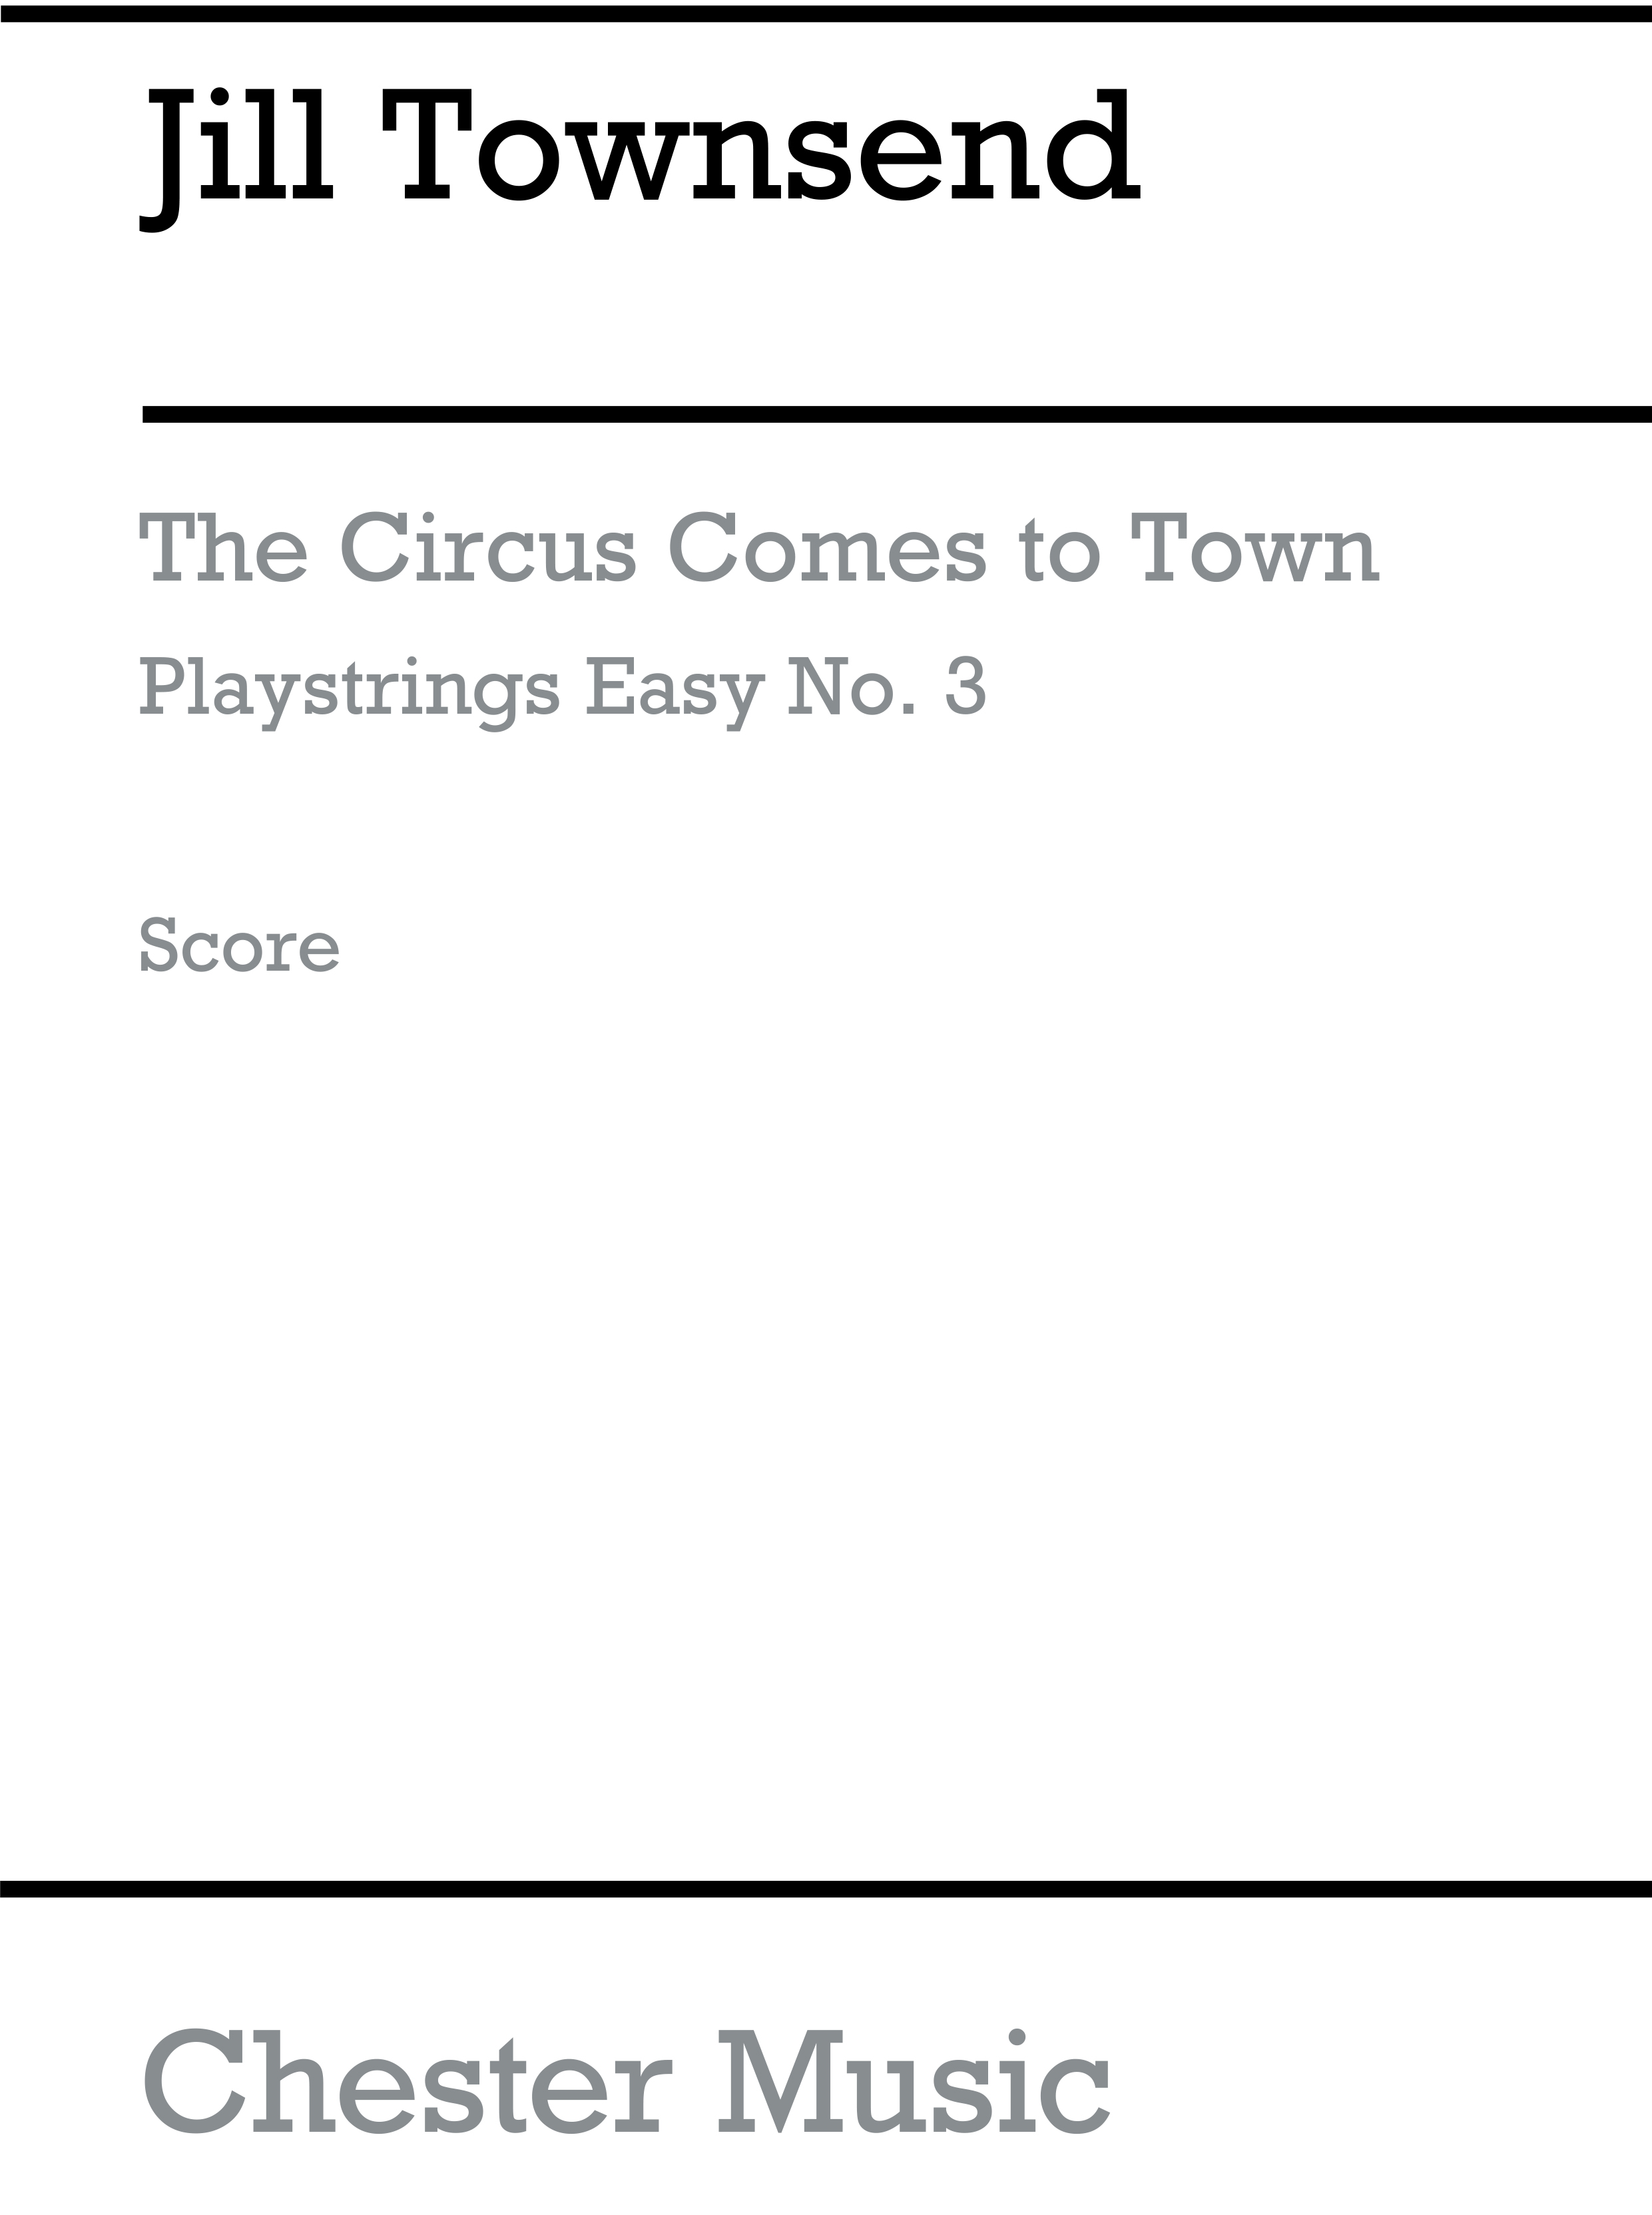 Jill Townsend: Playstrings Easy No. 3 - Circus Comes To Town: Orchestra: Score